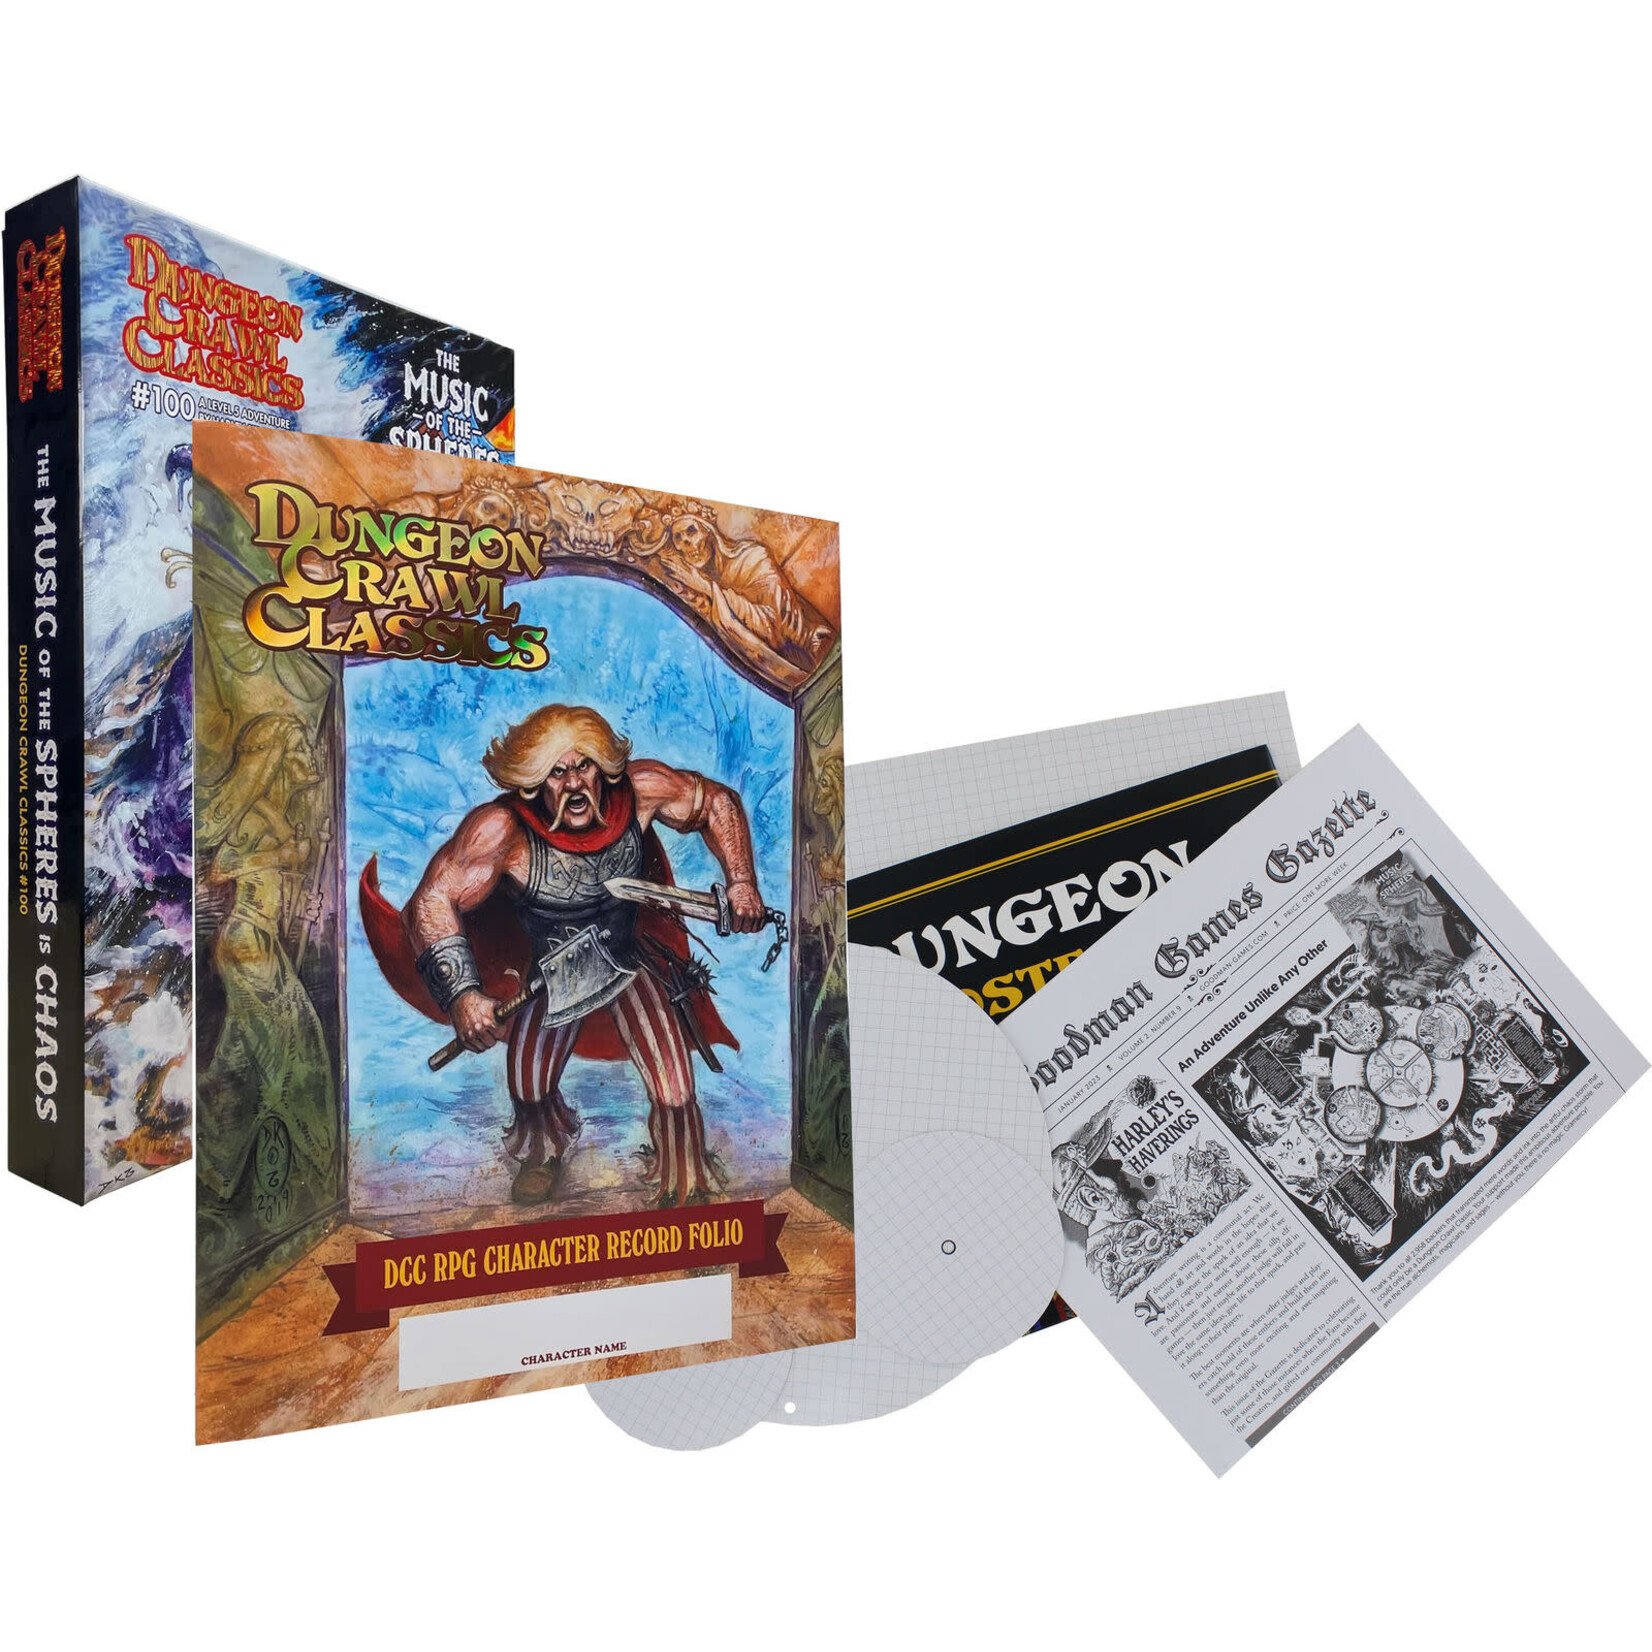 Goodman Games Dungeon Crawl Classics #100 : The Music of the Spheres is Chaos Box Set + Kickstarter Exclusives